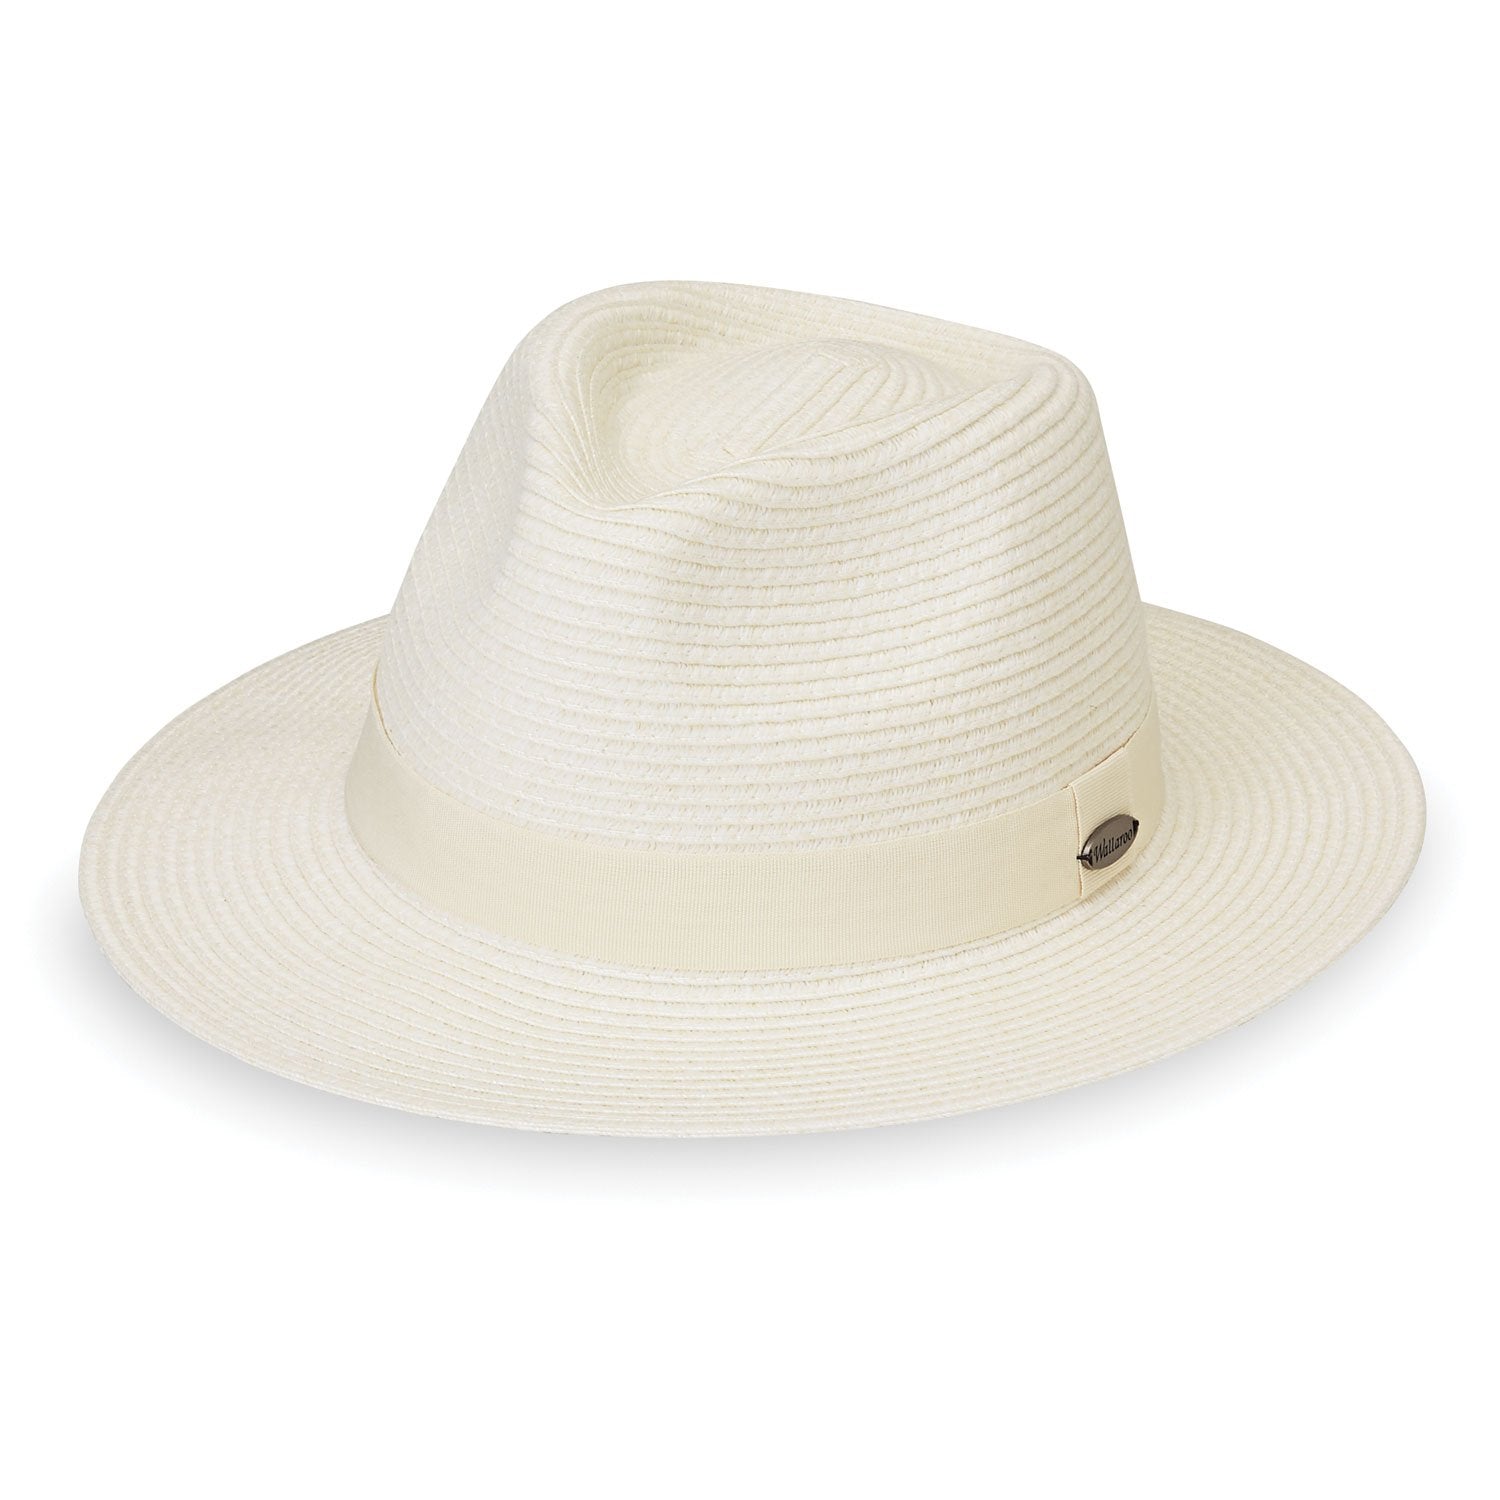 Featuring Packable UPF Ladies' Fedora Style Caroline Sun Hat in Ivory from Wallaroo